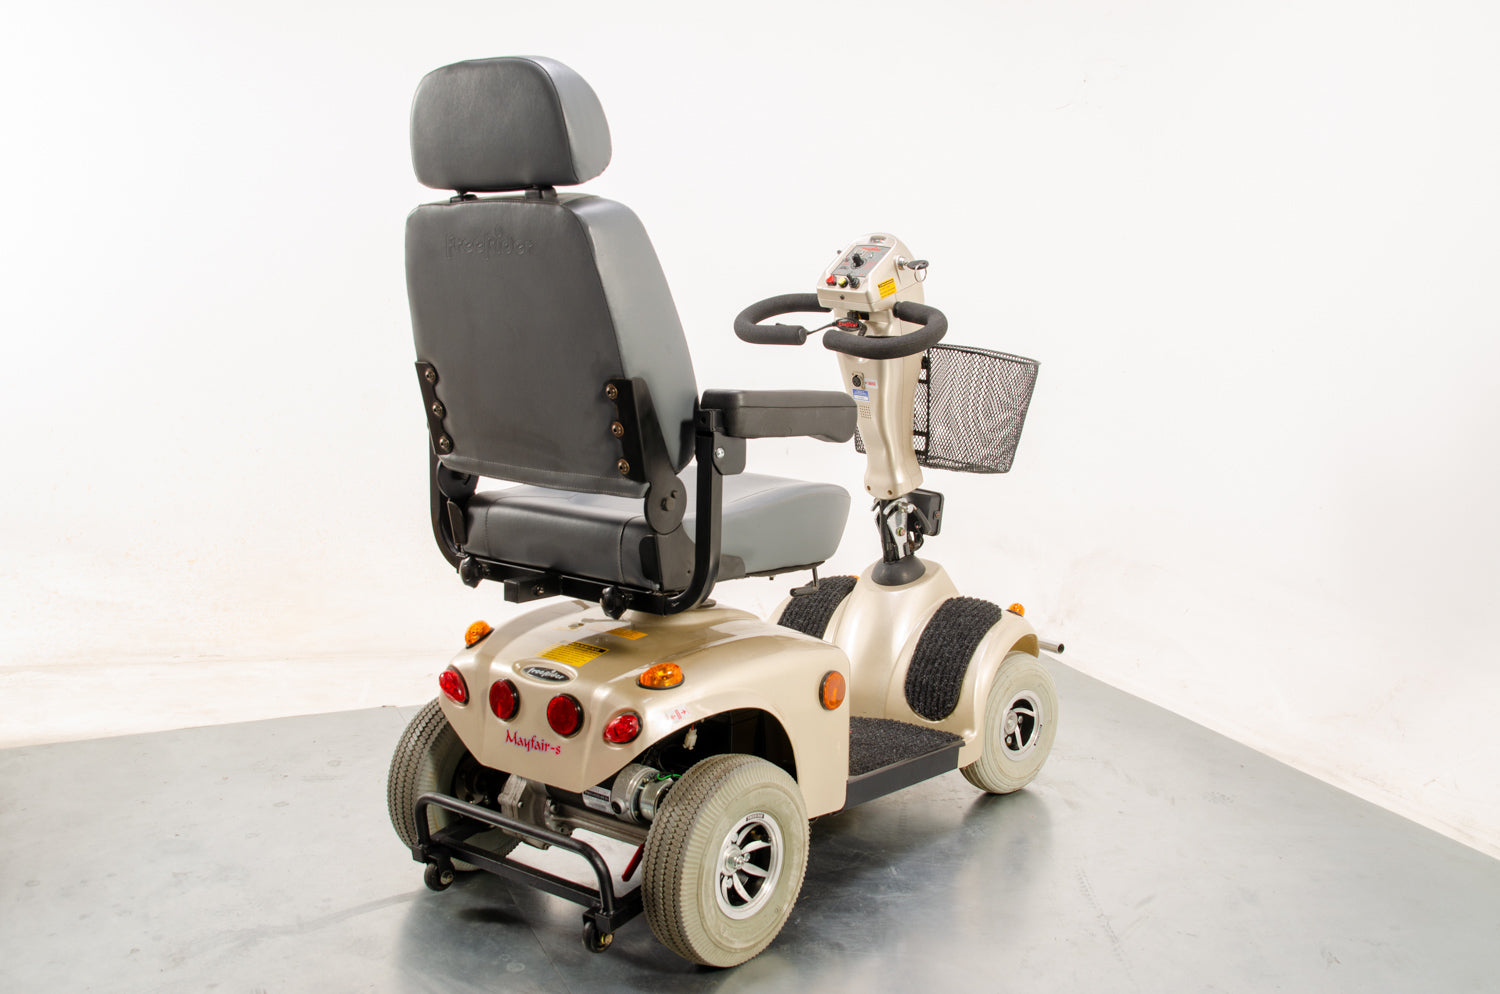 Freerider Mayfair S All-Terrain Used Mobility Scooter 8mph Gold Suspension Road Pavement